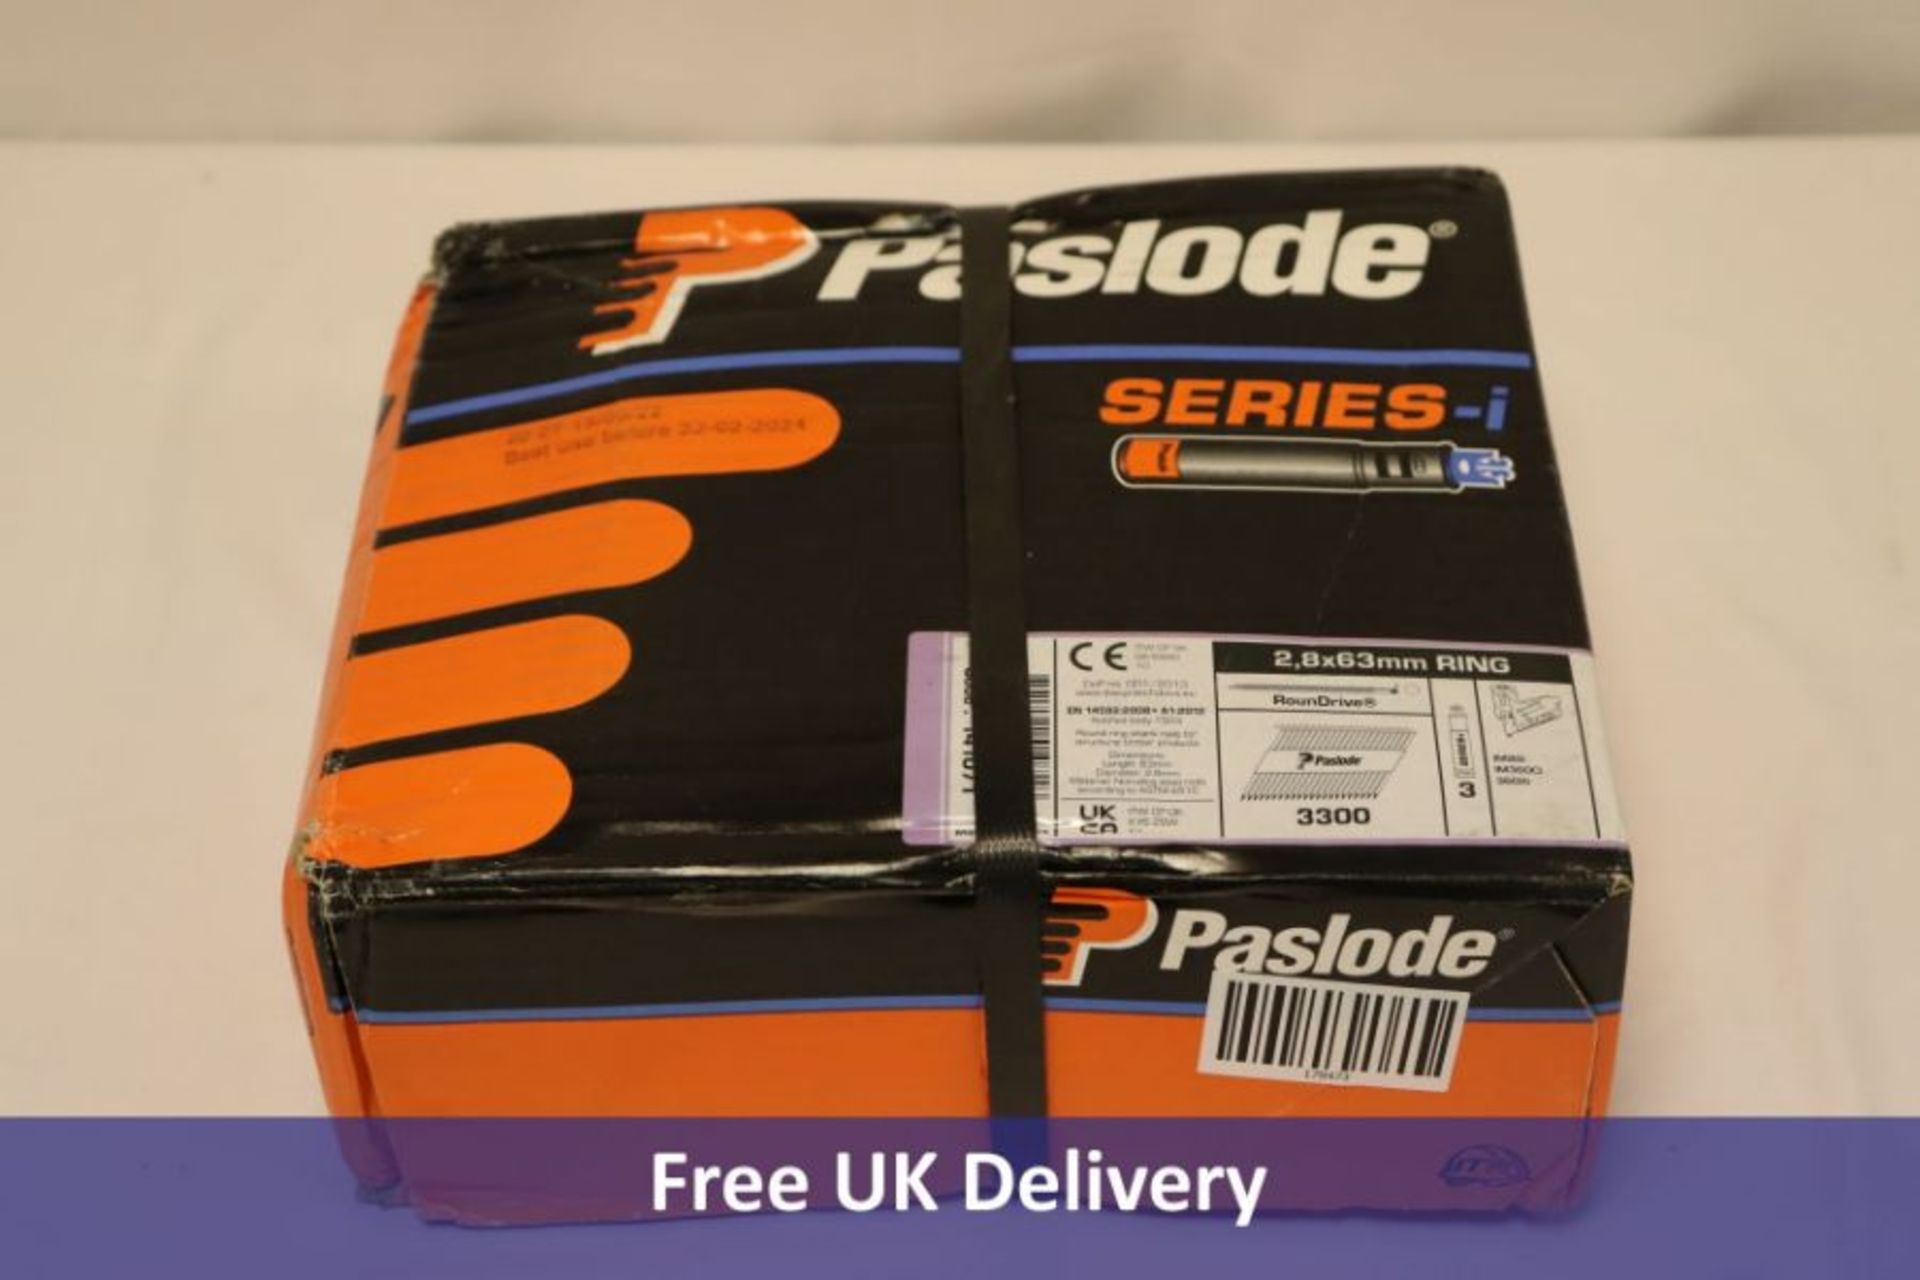 Paslode 141071 IM360 2.8mm x 63mm Galvanised Nails, Pack of 3300 and 3 Fuel Cells